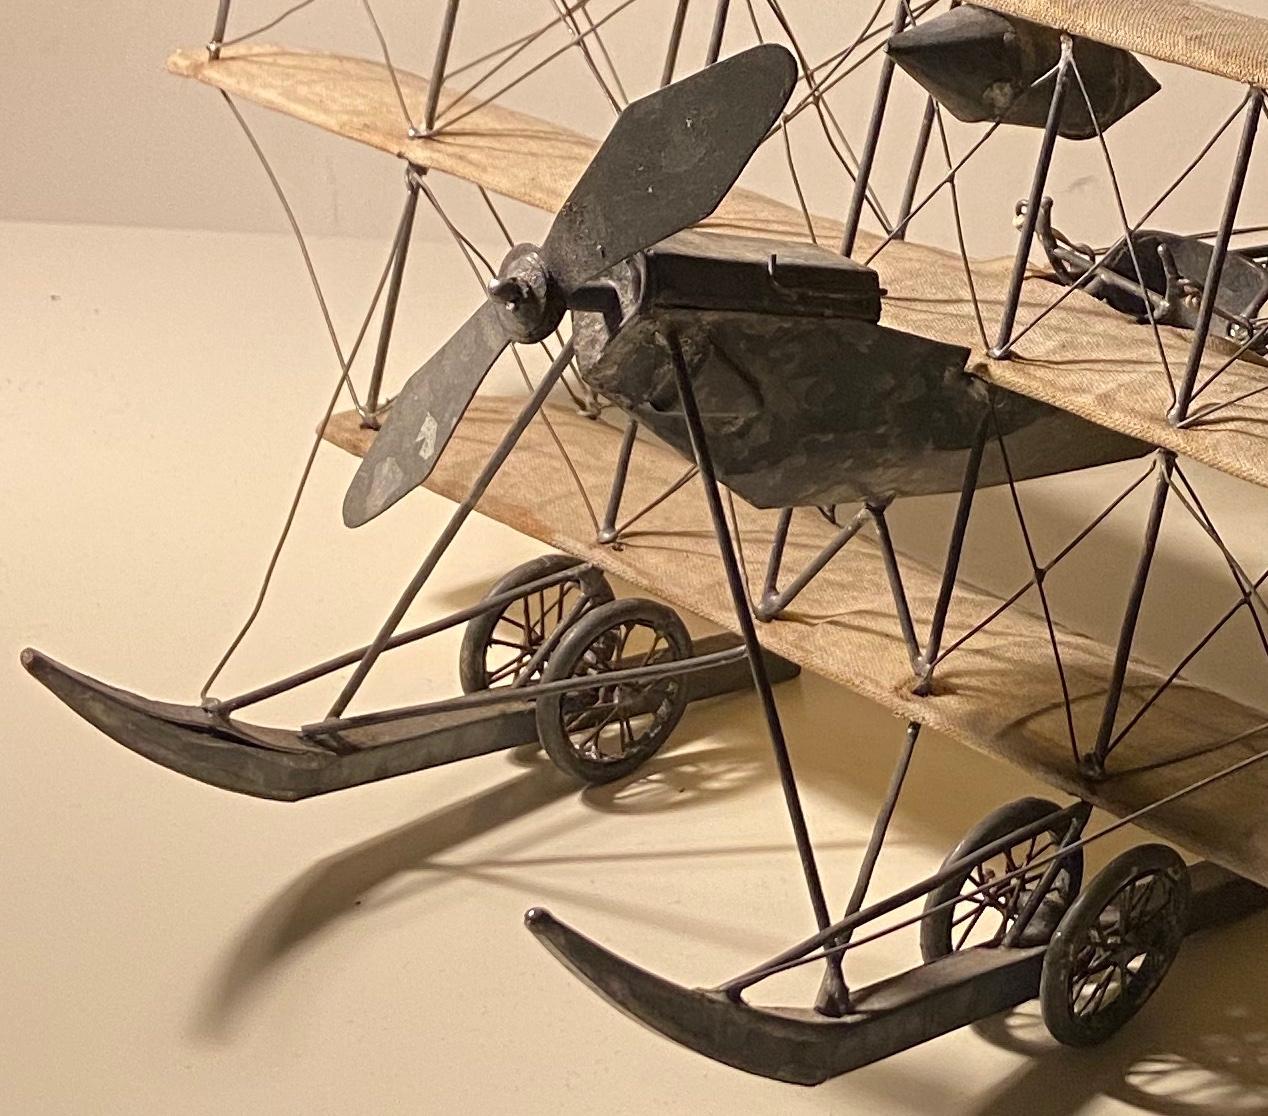 An early 20th century museum quality model of the 1910 Roe IV Triplane.

An absolutely rare stunning piece, and one of the earliest examples of an aircraft/aircraft model in existence. Working propeller, wheels and rudder. 

A.V. Roe became Avro